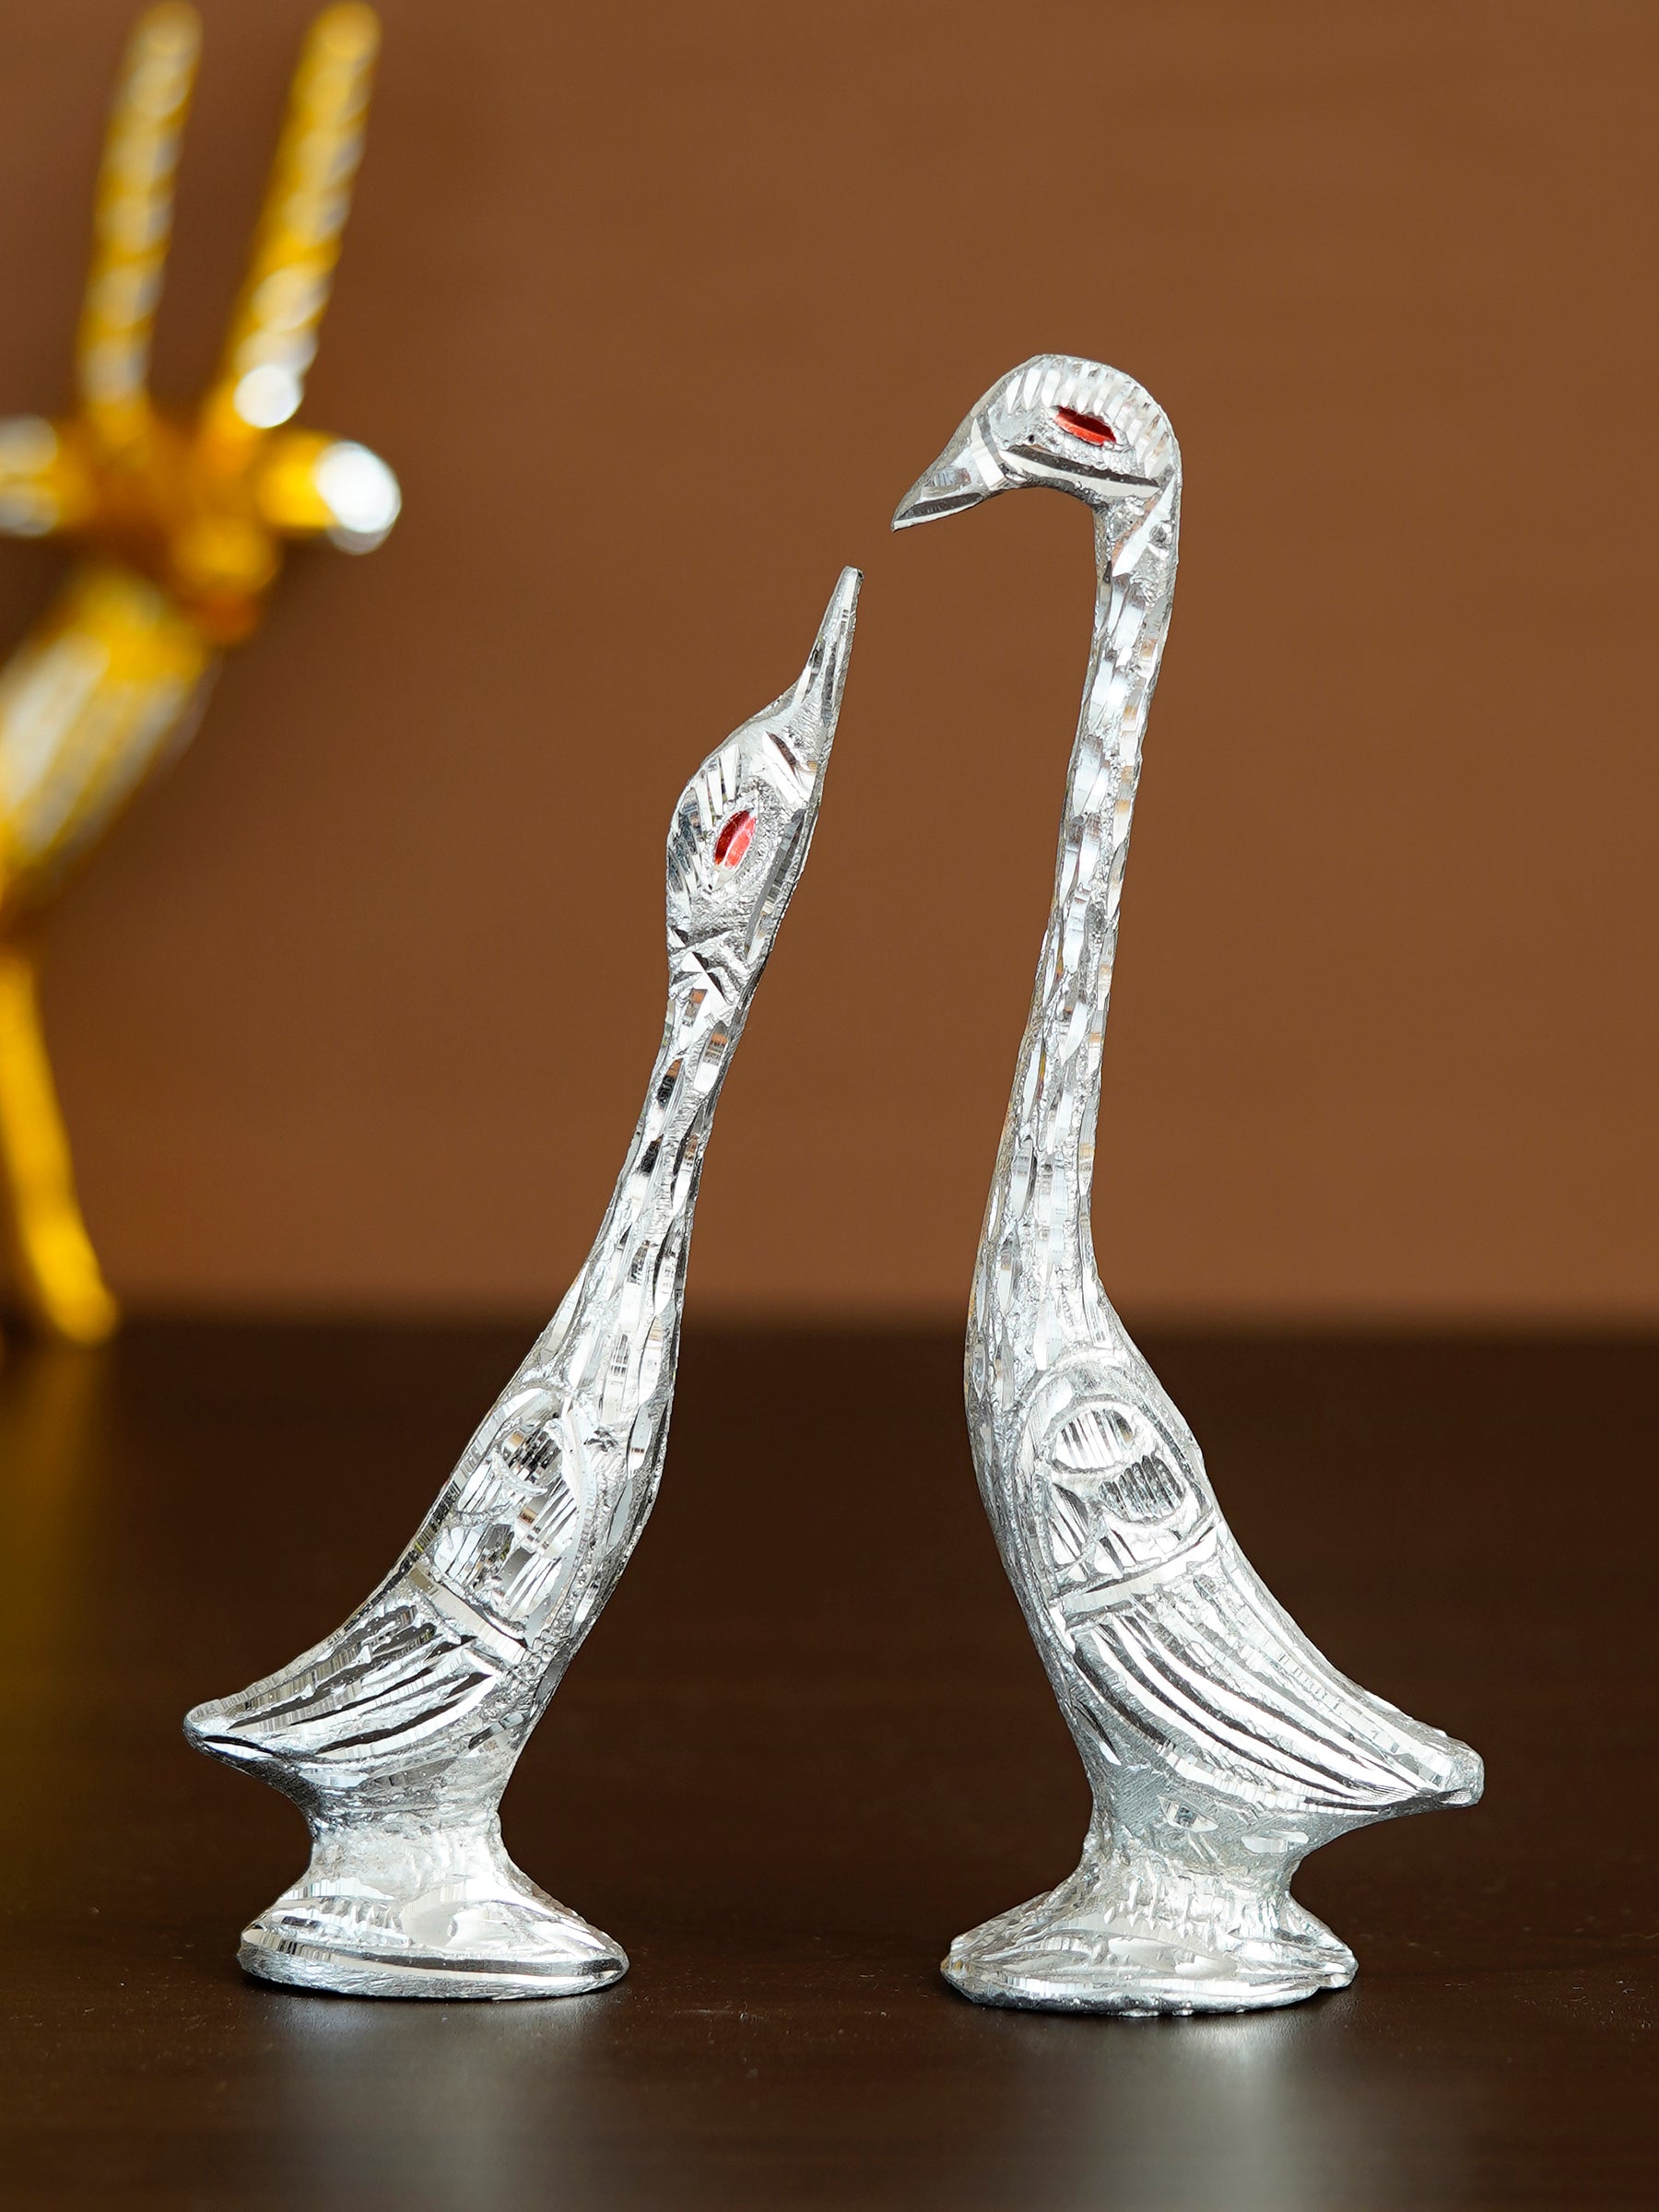 7 Inch Silver Kissing Swan Couple Handcrafted Decorative Figurine